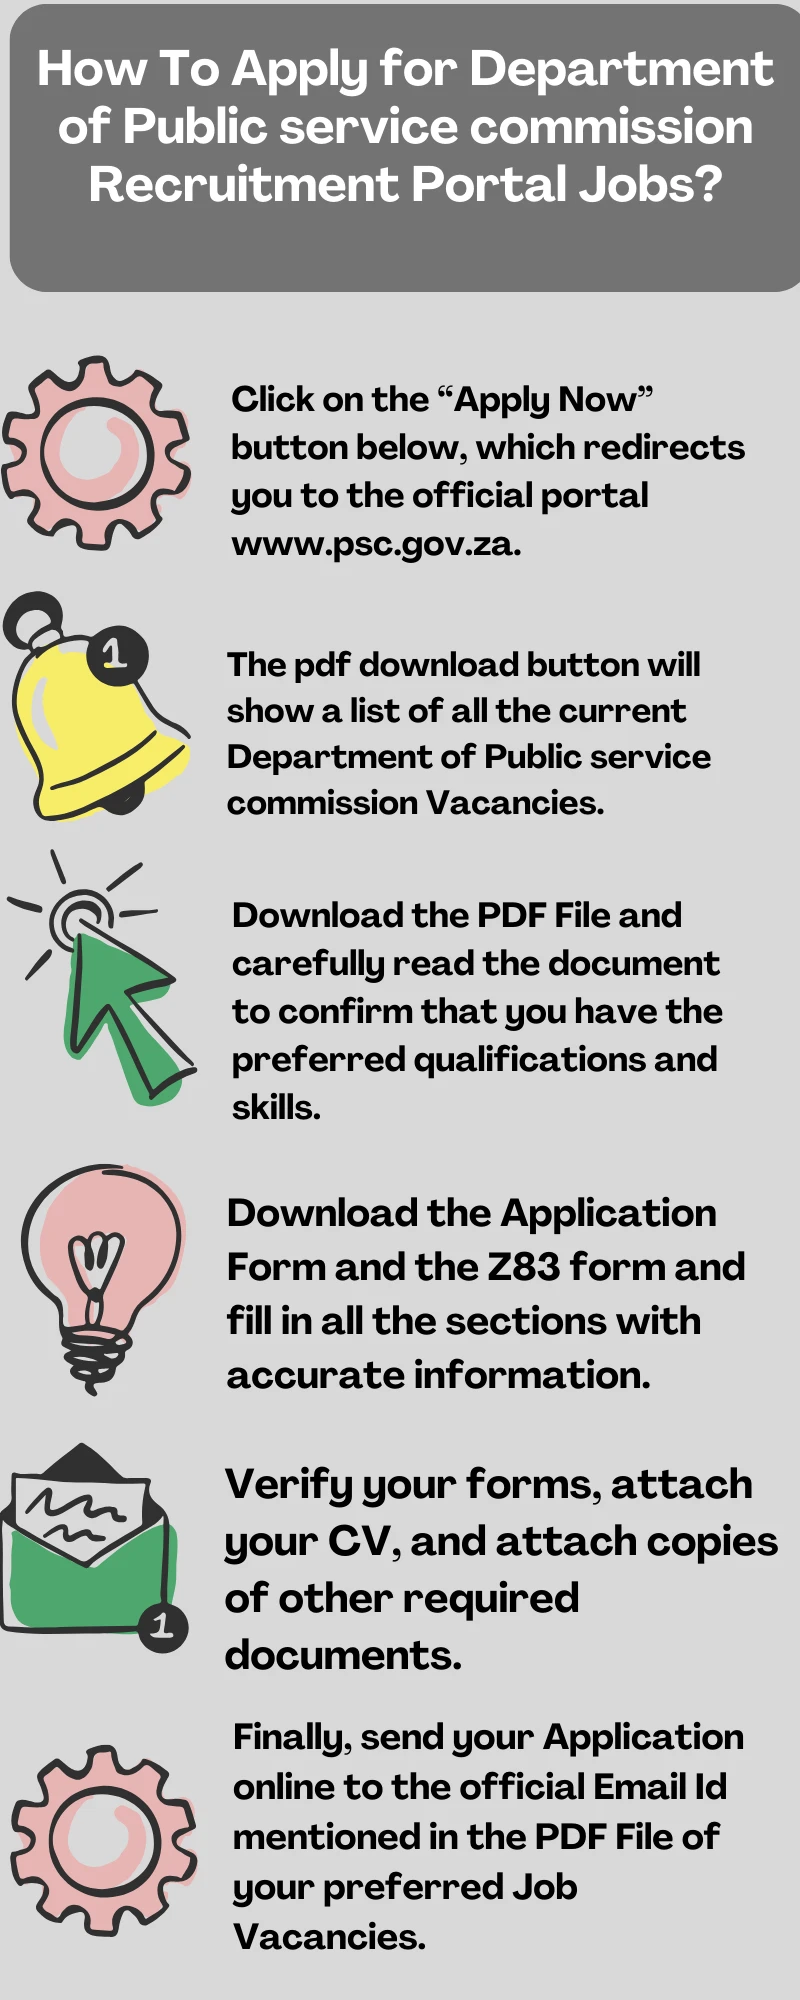 How To Apply for Department of Public service commission Recruitment Portal Jobs?